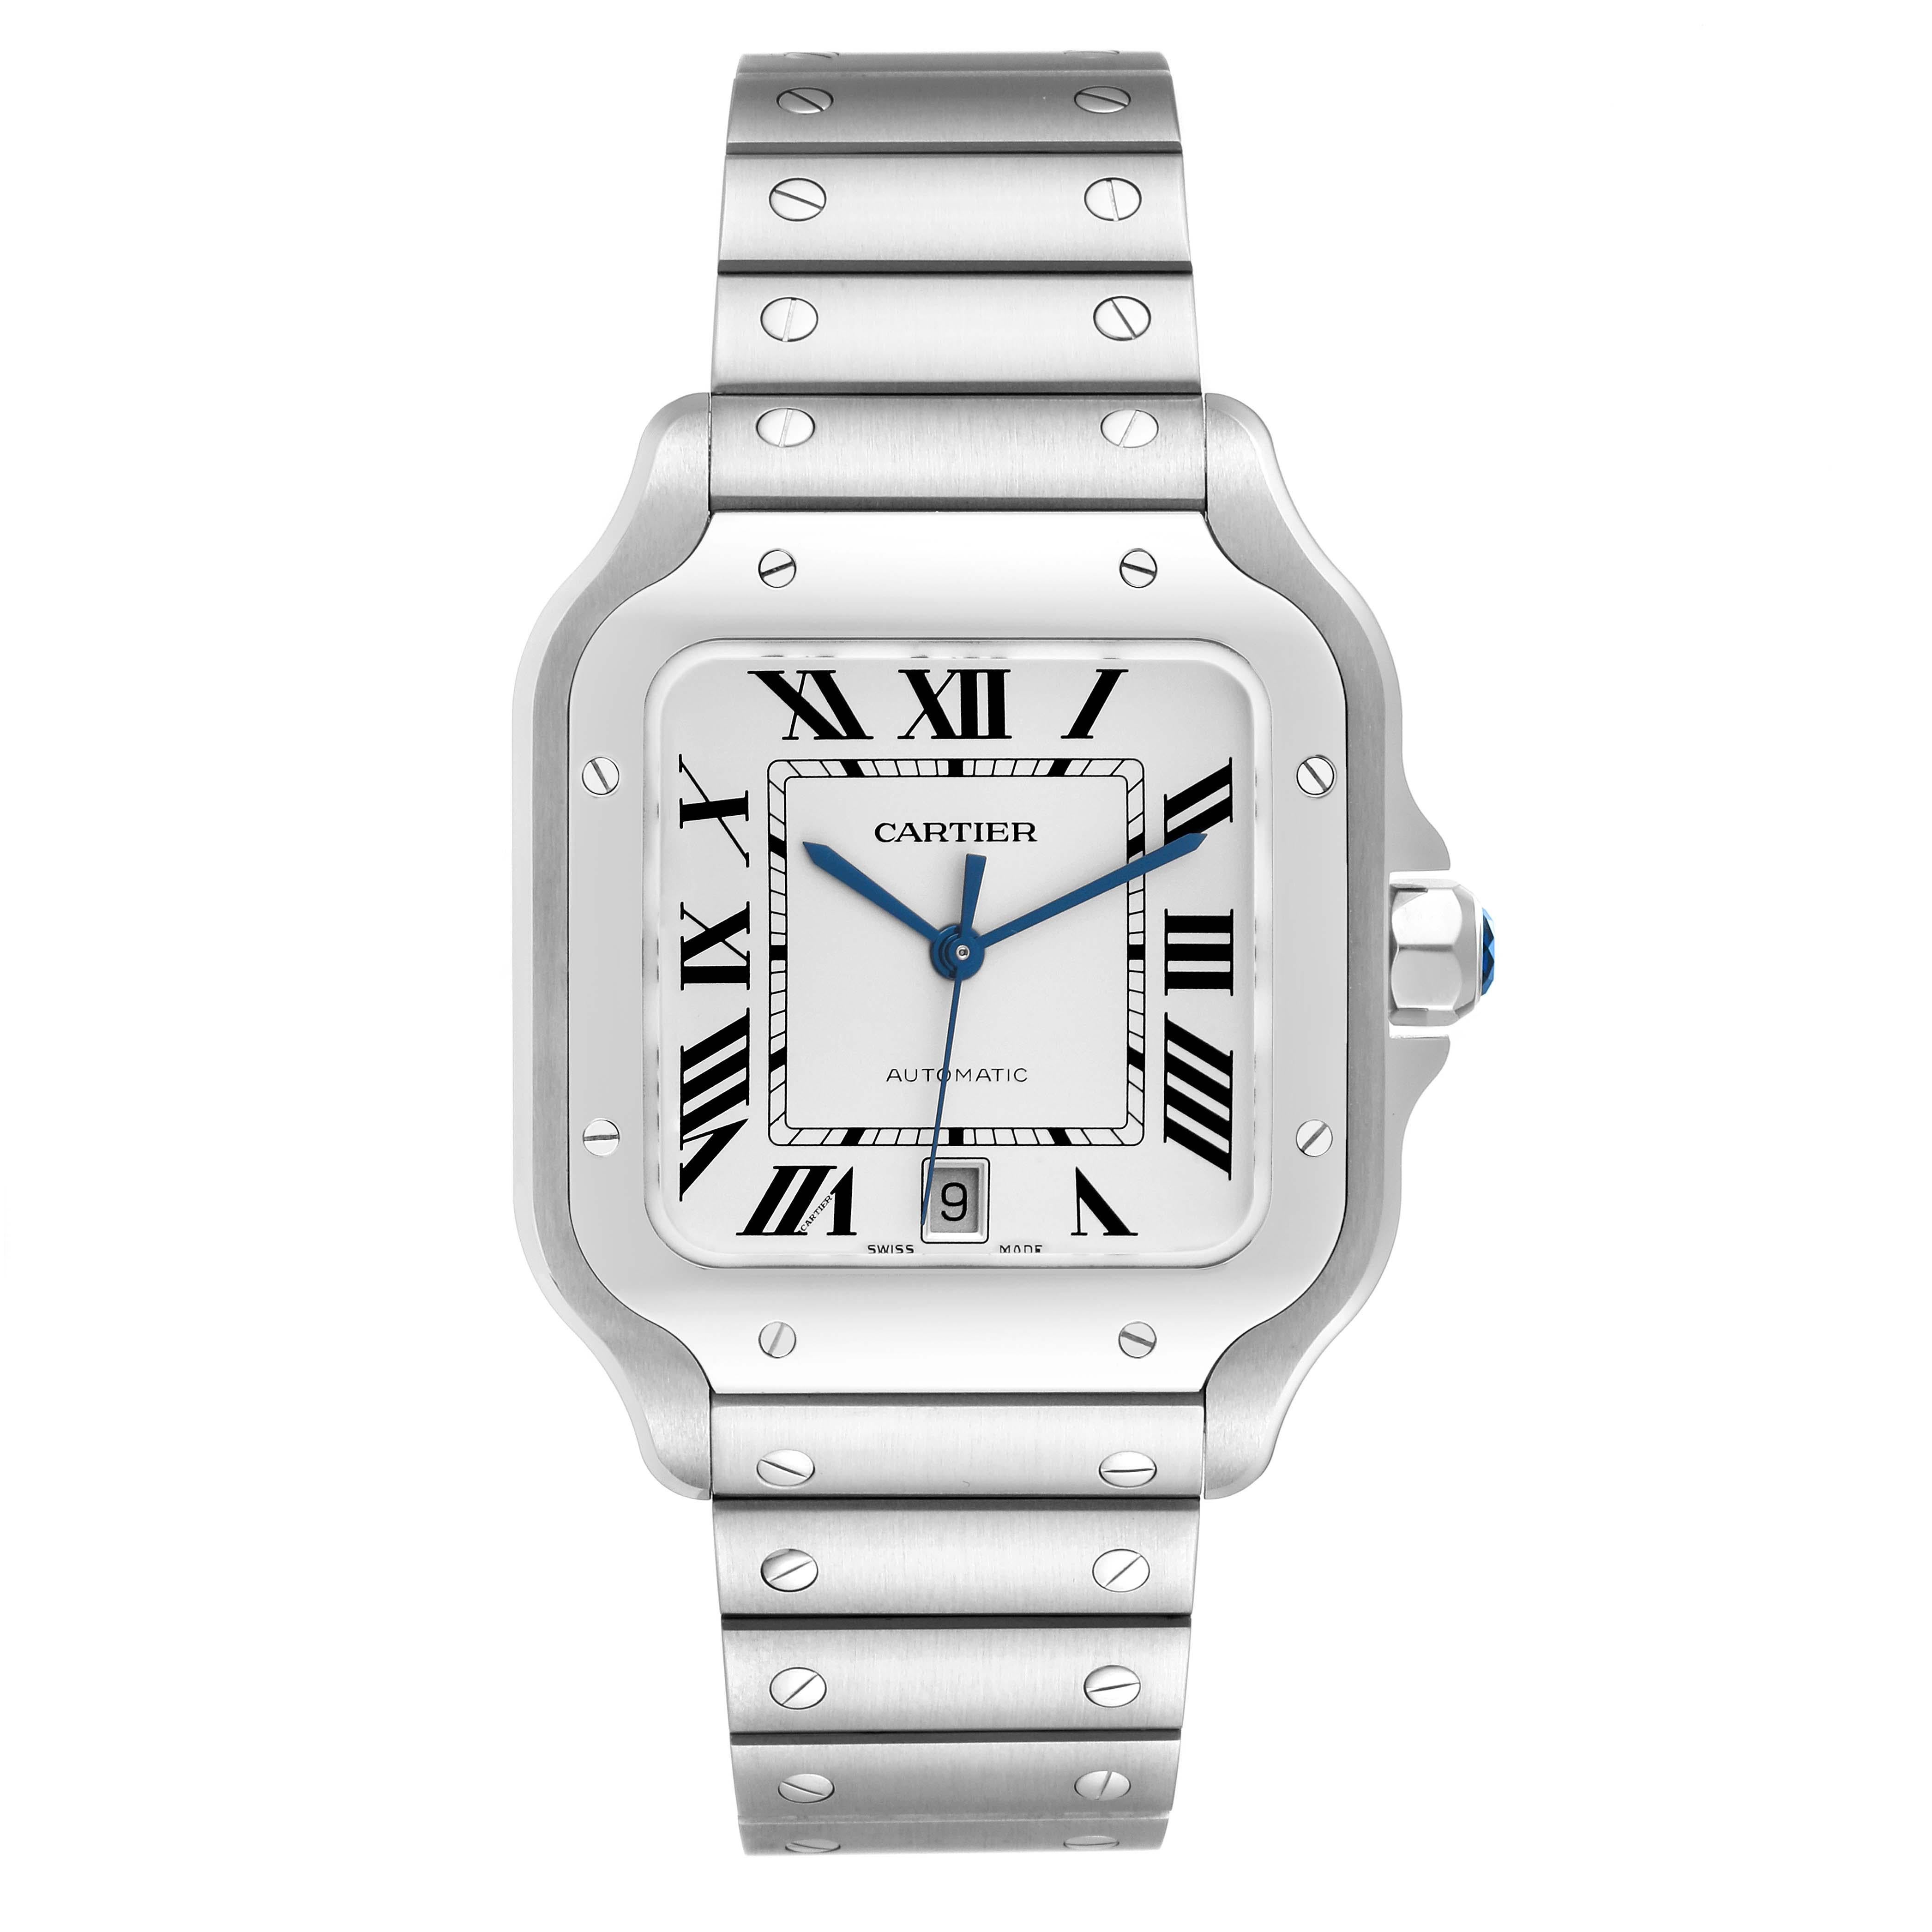 Cartier Santos Silver Dial Large Steel Mens Watch WSSA0018 Box Card. Automatic self-winding movement. Stainless steel case 39.8 x 47.5 mm.  Octagonal crown set with the faceted blue spinel. Stainless steel bezel punctuated with 8 signature screws.